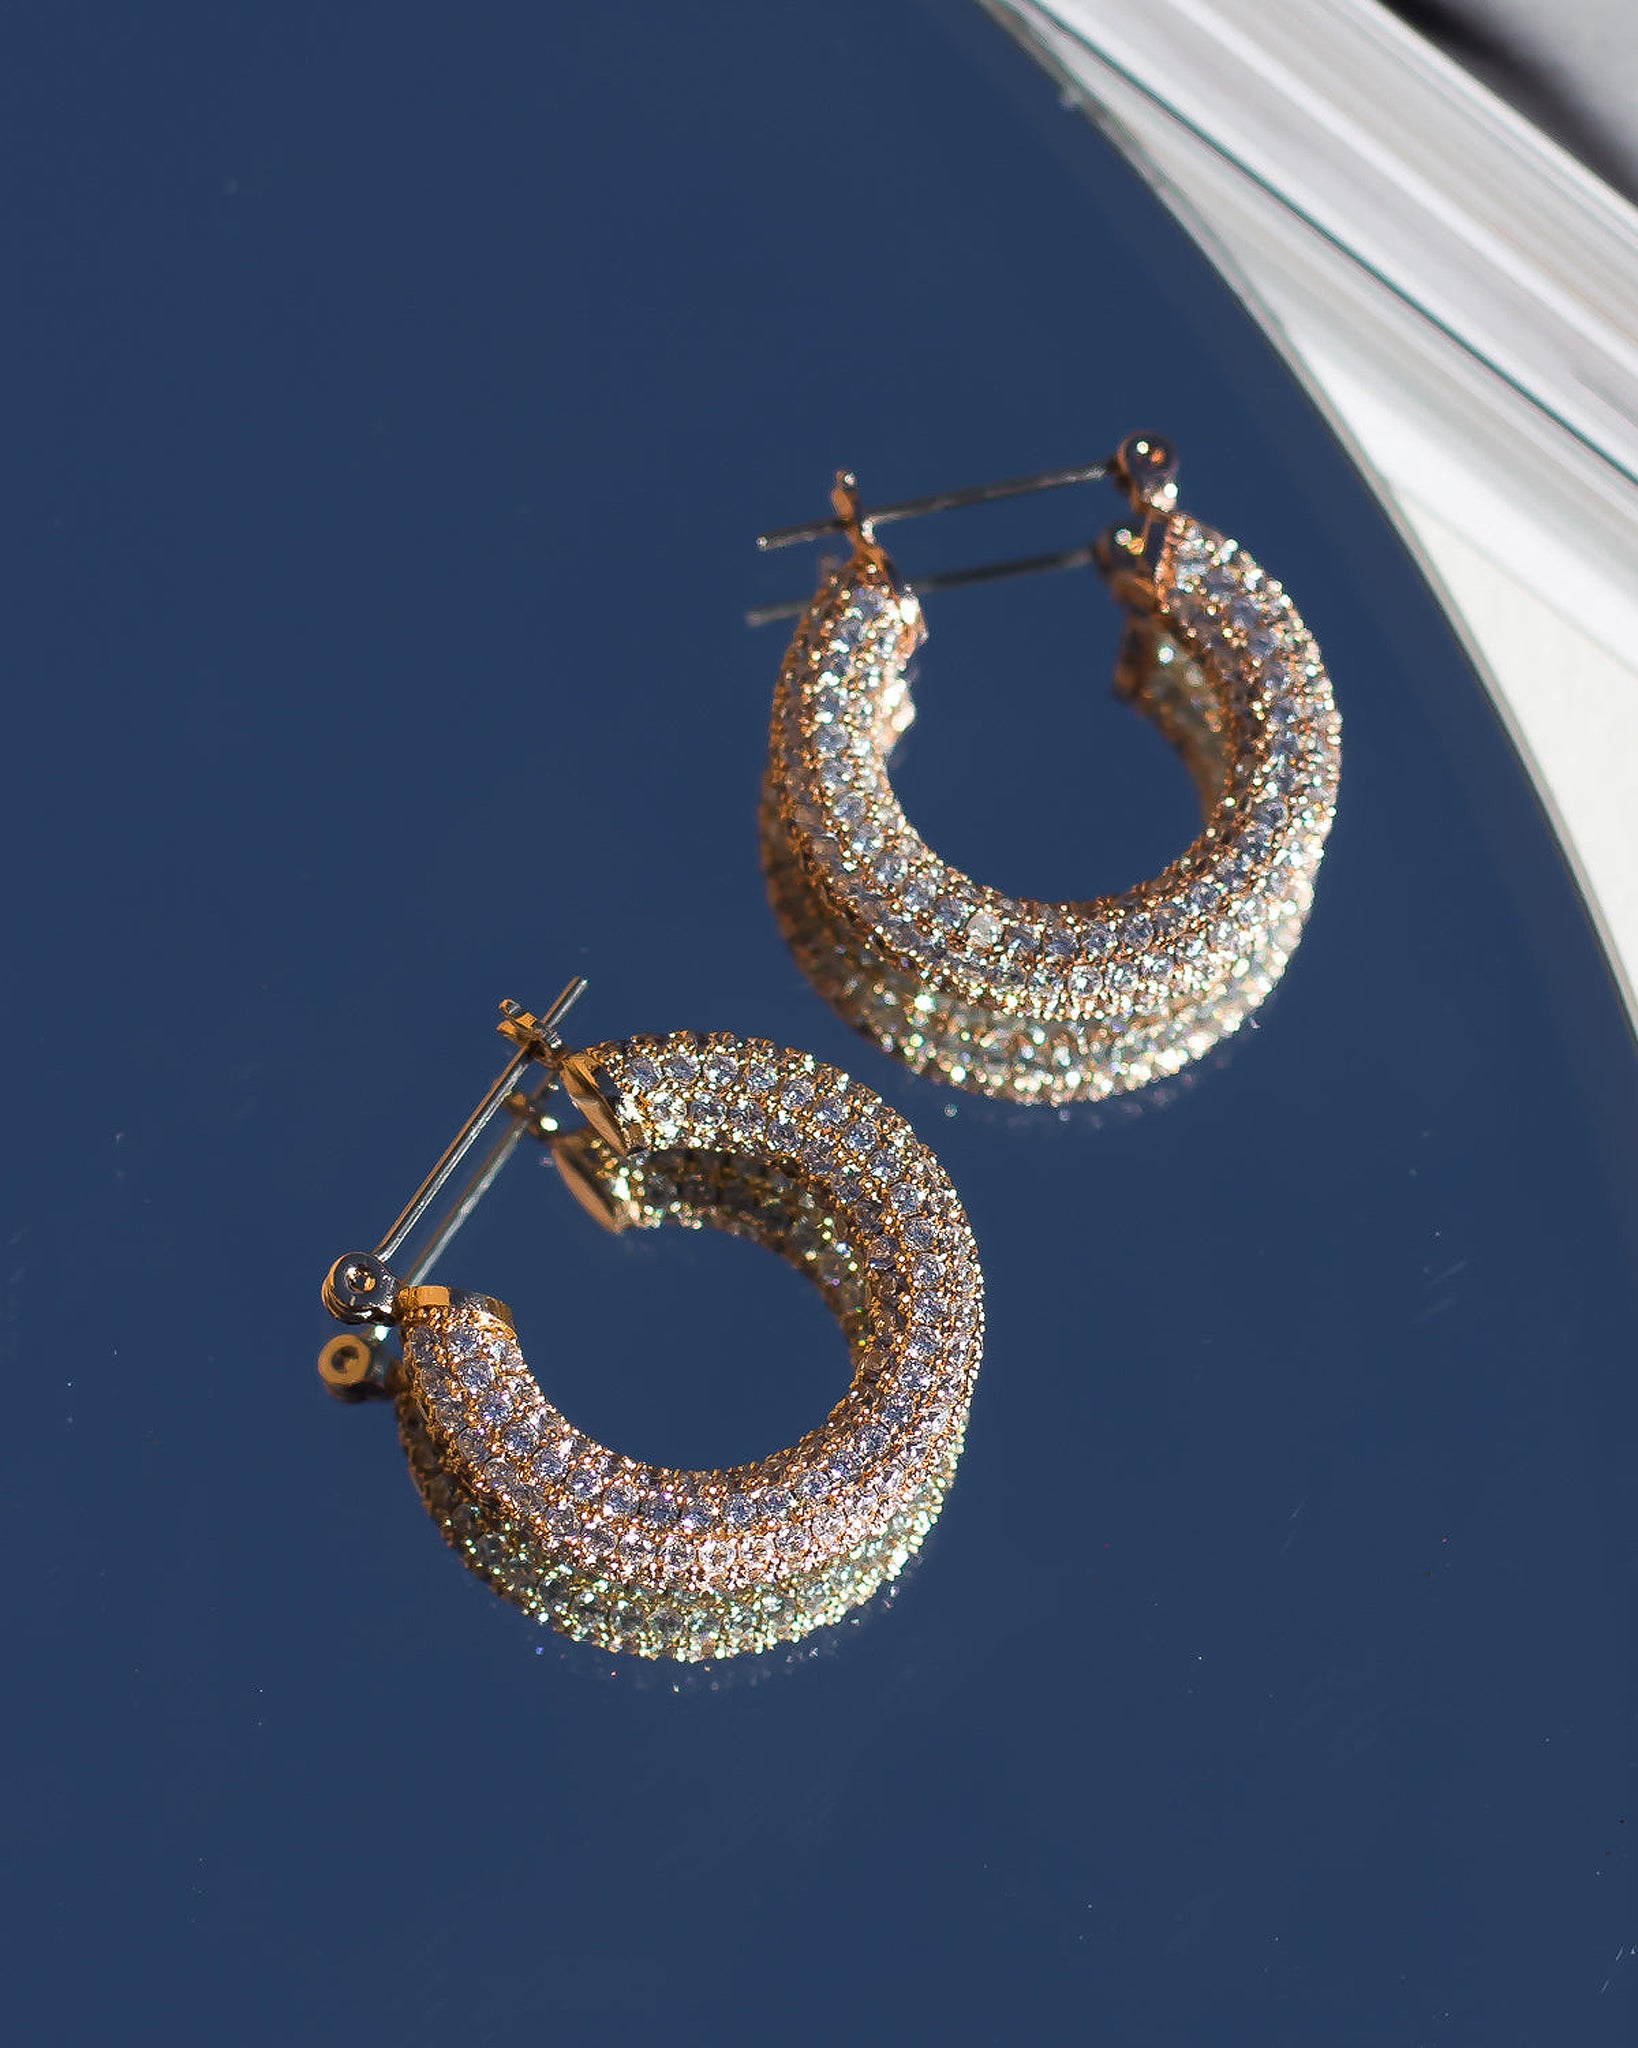 Luv Aj Pave Baby Amalfi Tube Hoop Earrings in CZ and Polished 14k Antique Gold Plated